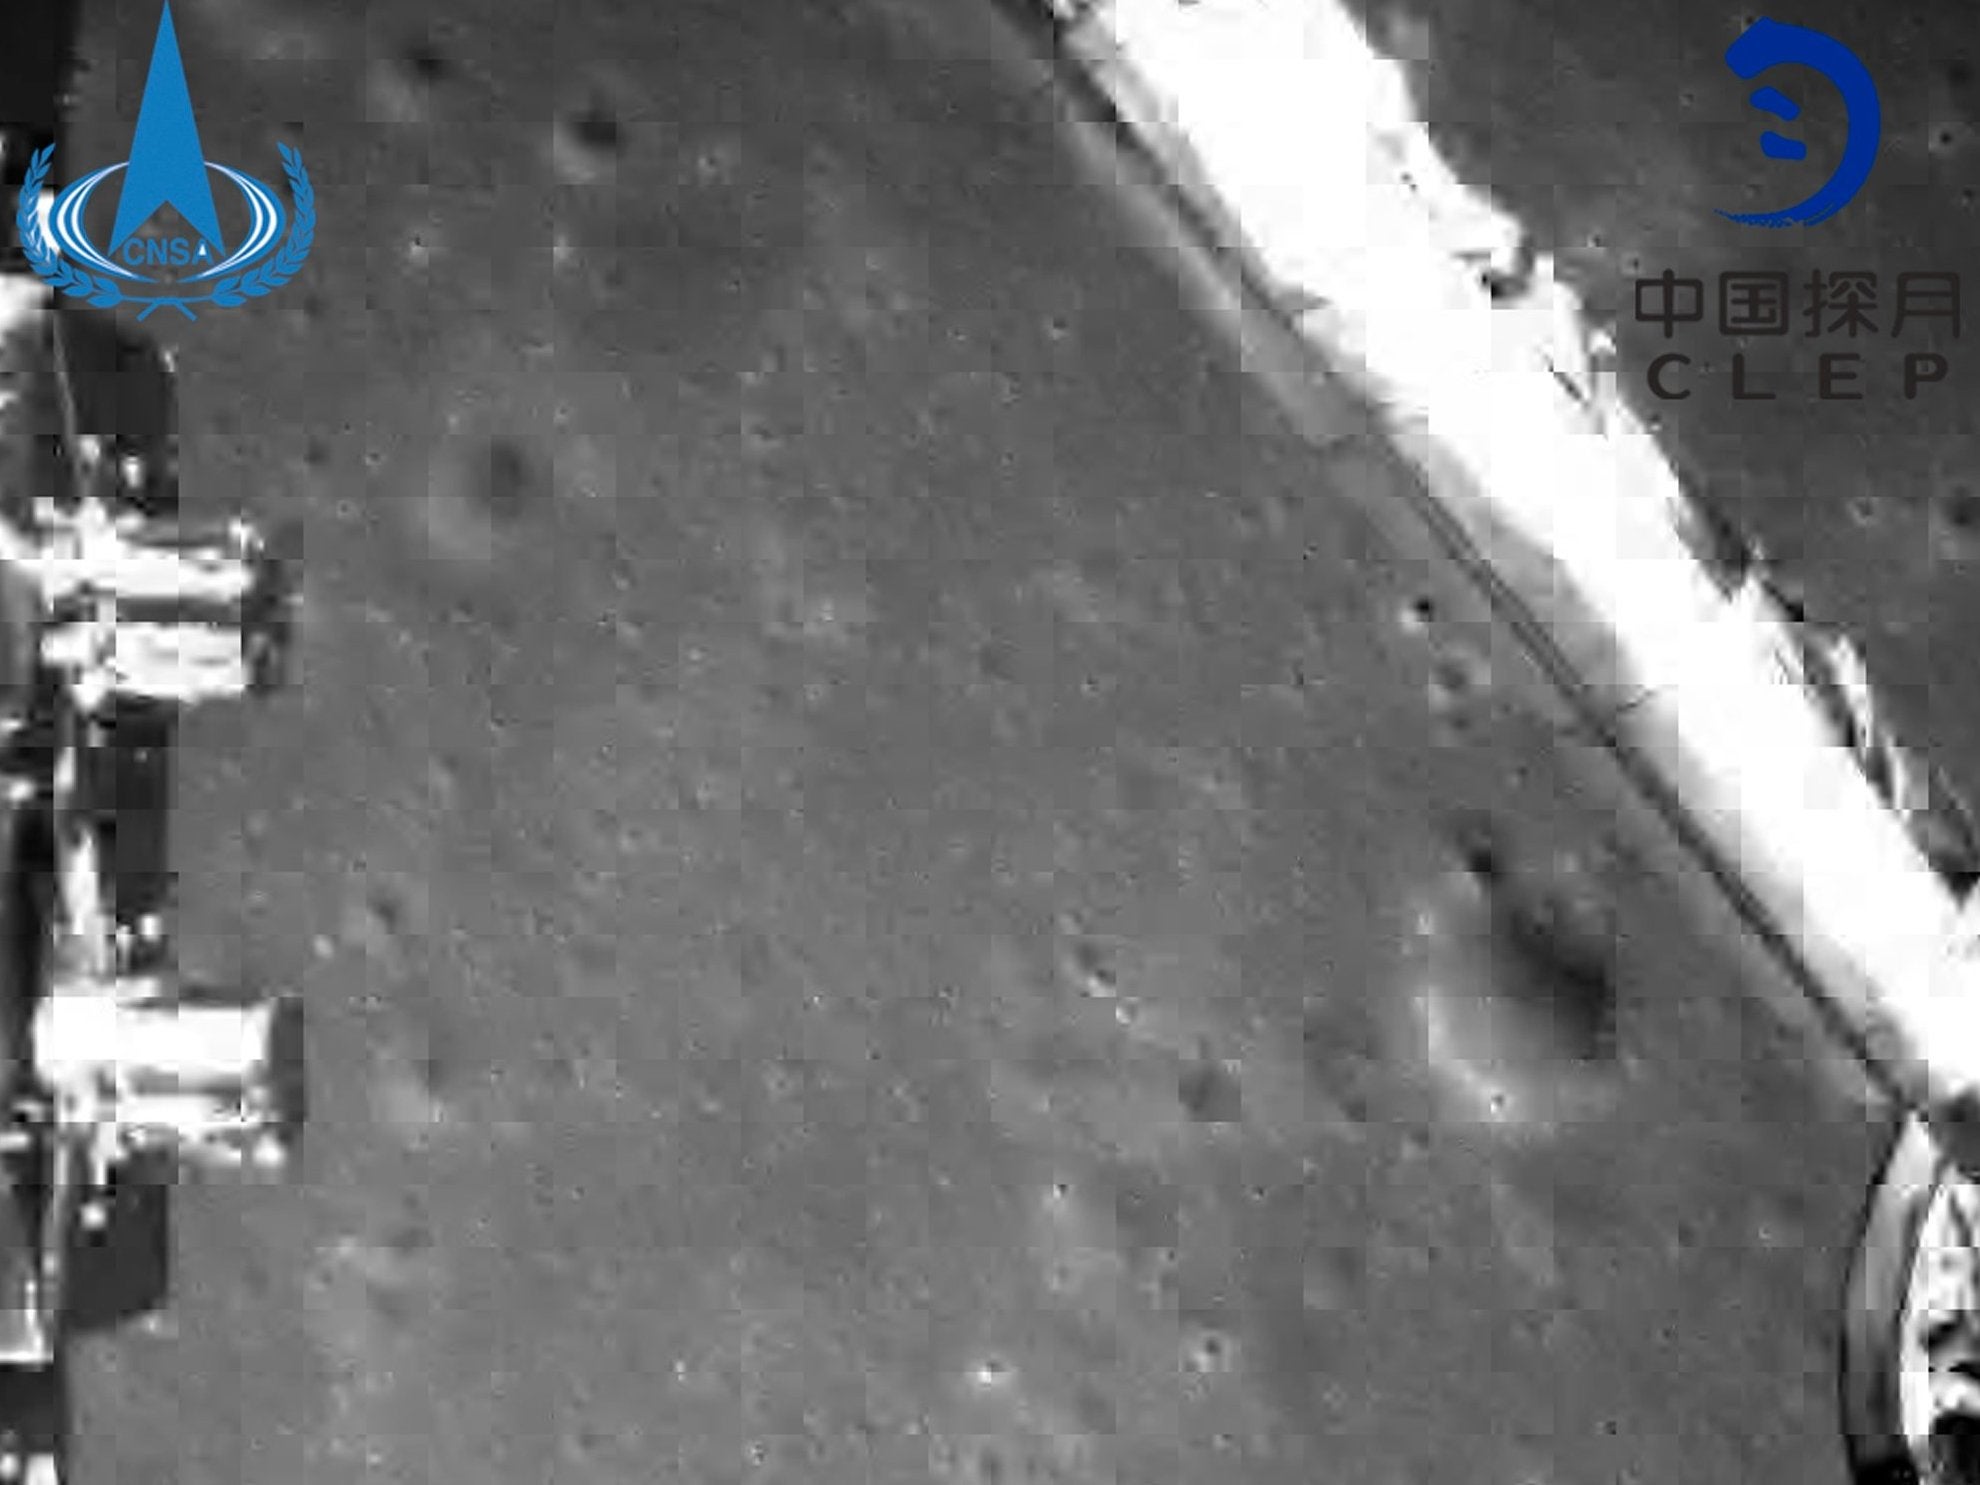 Chang’e-4 made the first ever landing on the far side of the moon